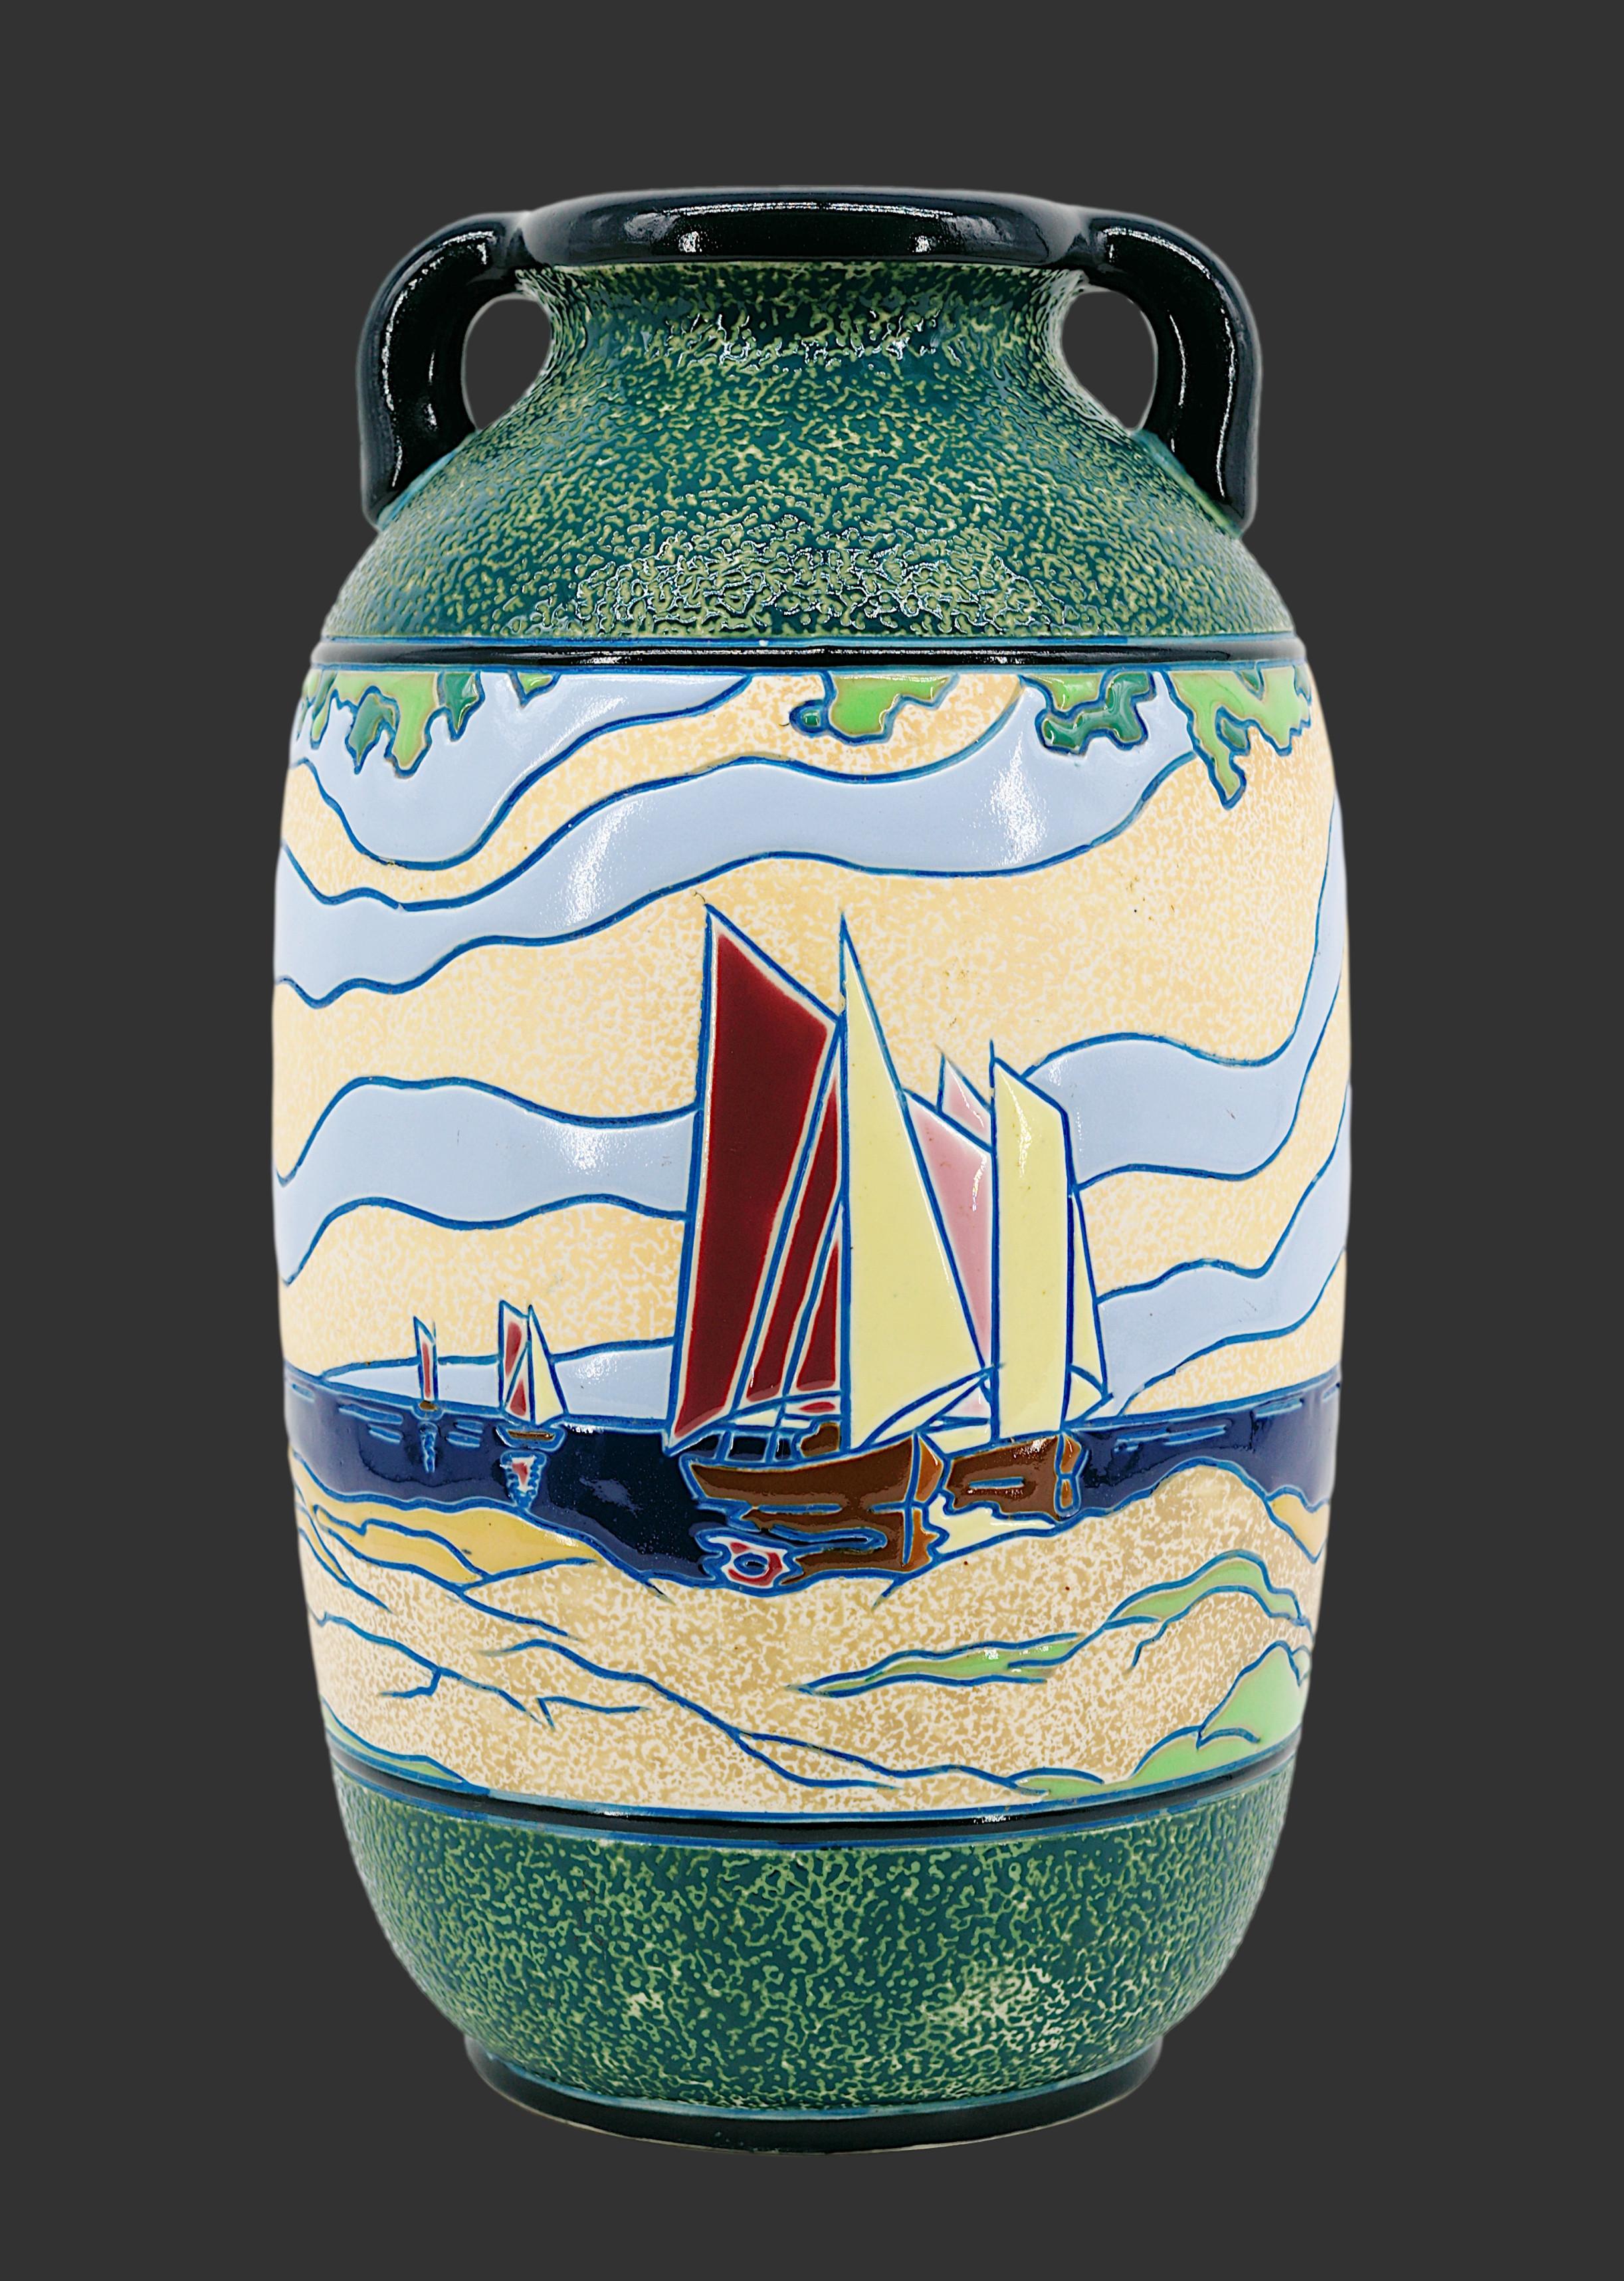 Large Art Deco vase by AMPHORA (Turn Teplitz, Bohemia), Czech Republic, late 1920s. This vase was produced for France. Large vase with two small handles. Rotating enameled Art Deco decoration representing fishing boats returning to port and on the